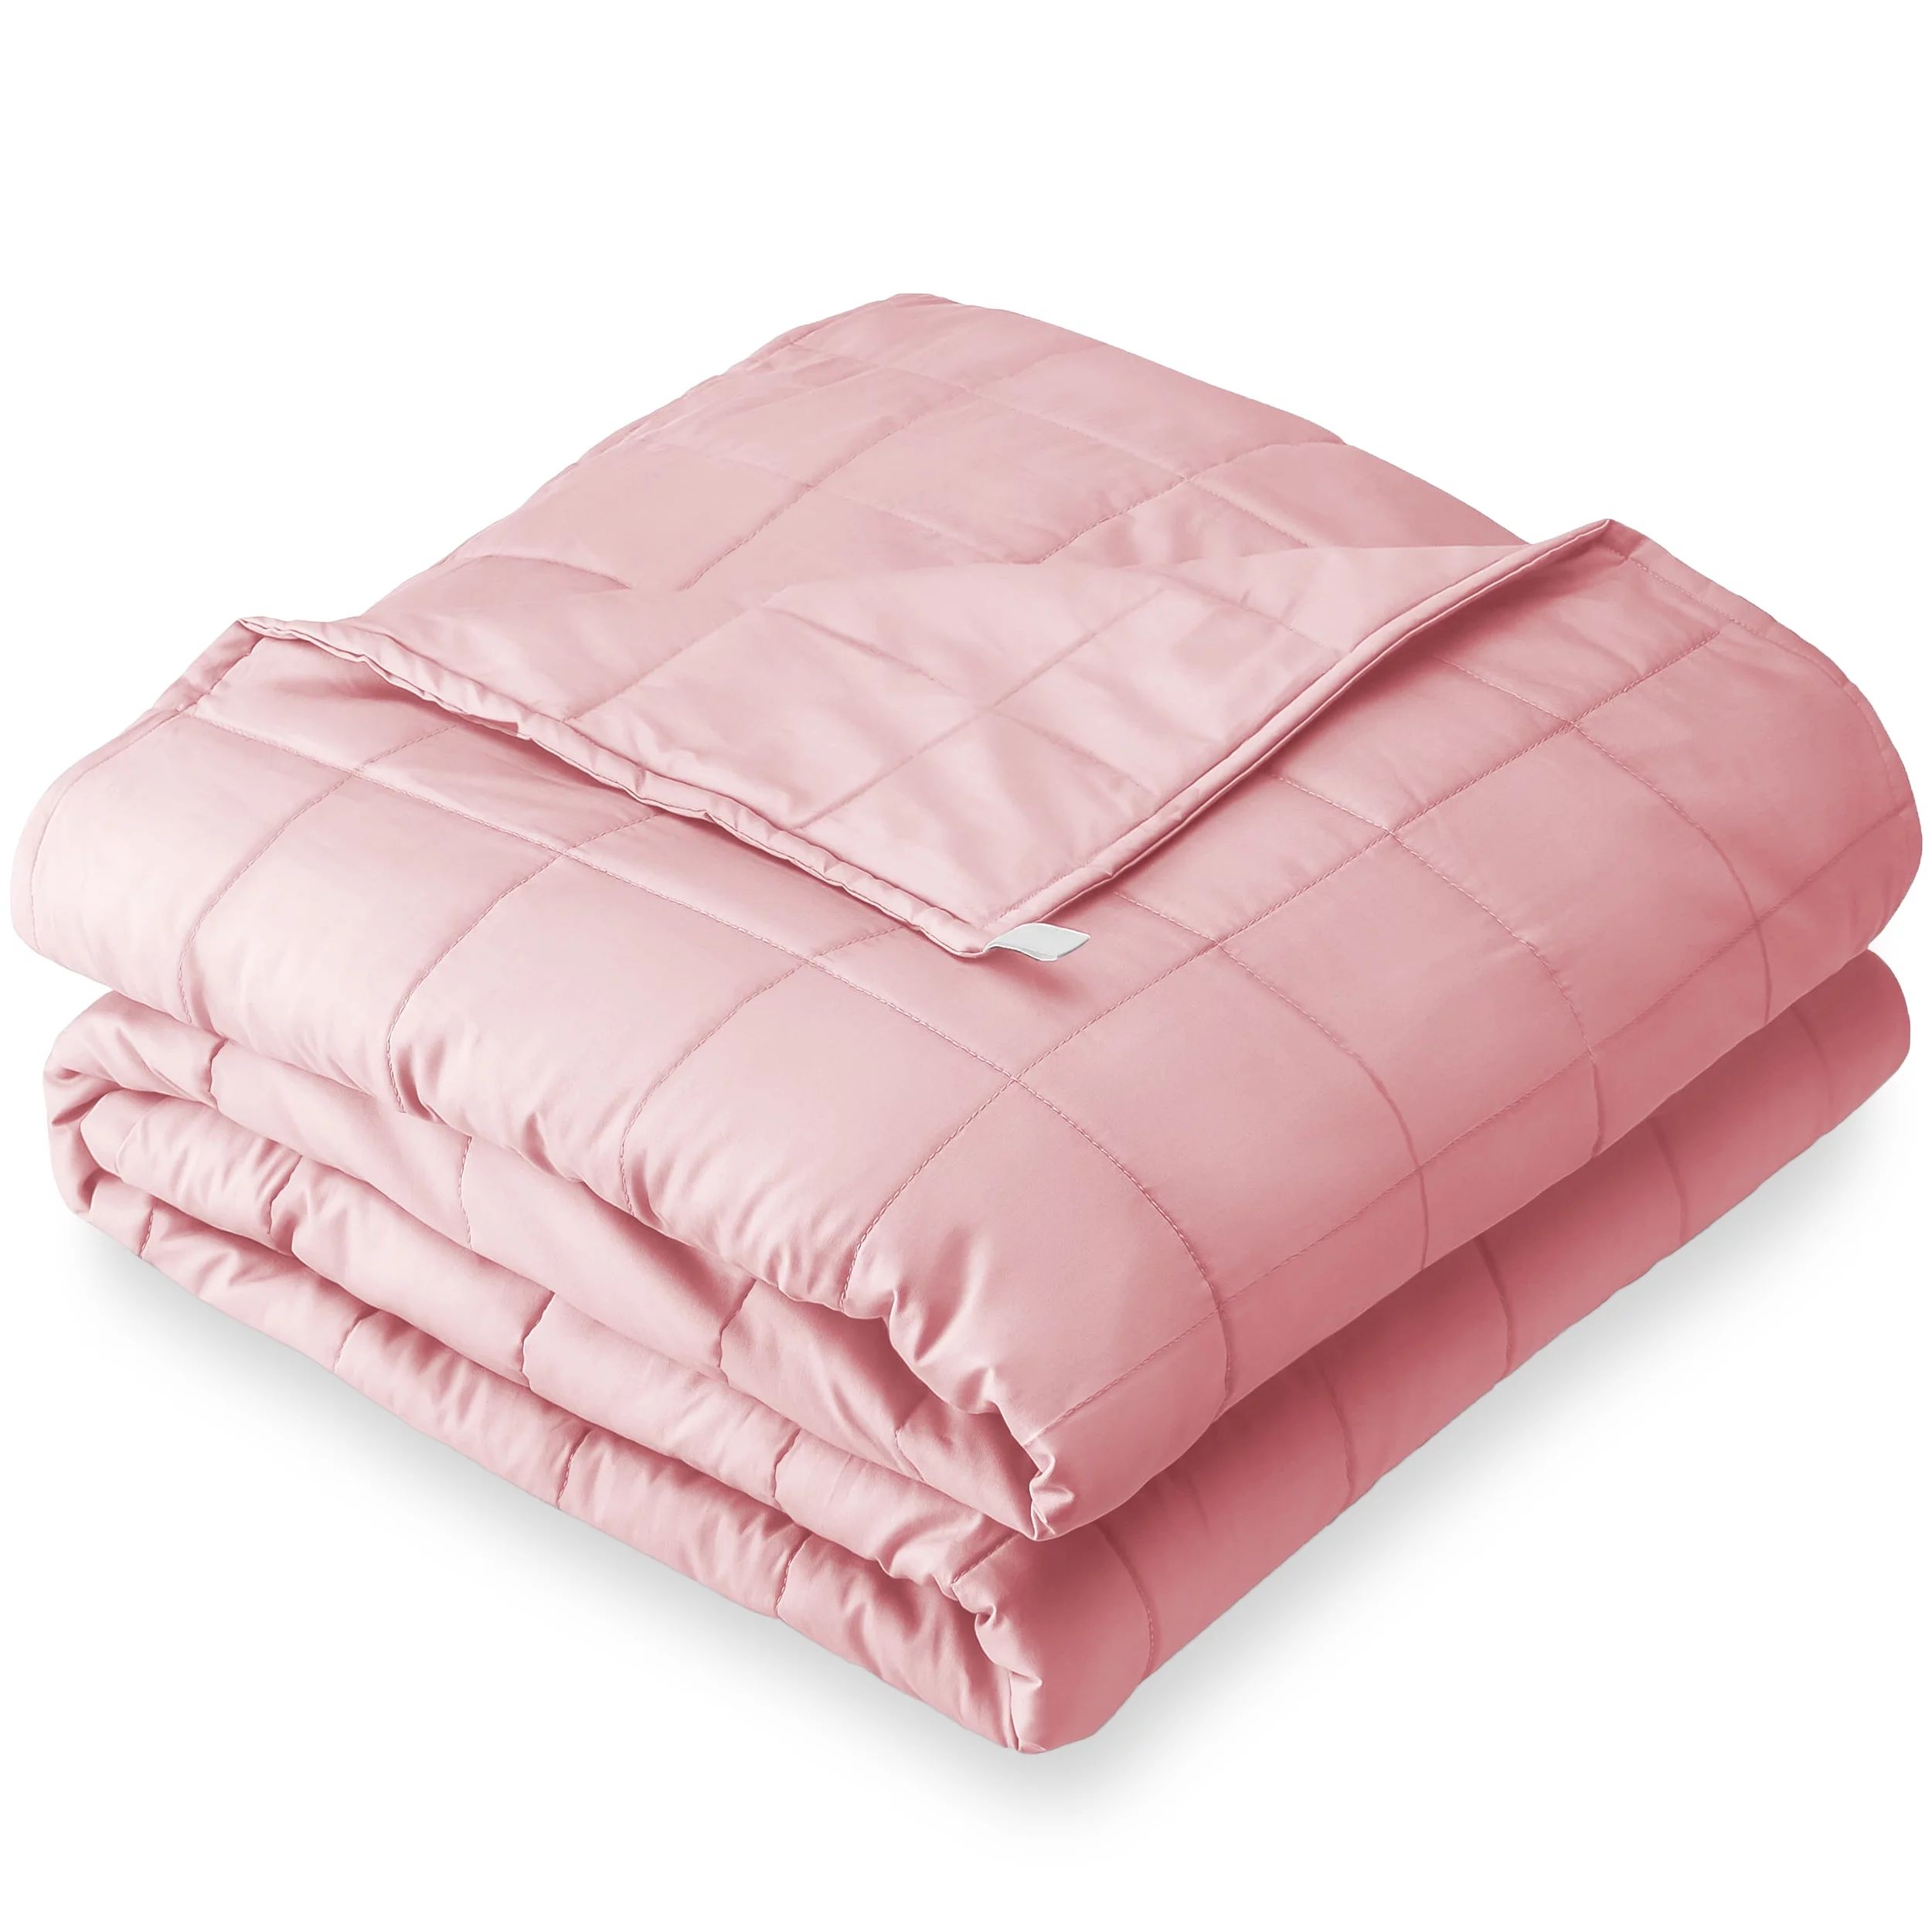 Bare Home Weighted Blanket 10lb (40"x60"), Heavy Blanket Throw Size for Sleeping, Heavyweight 100... | Walmart (US)